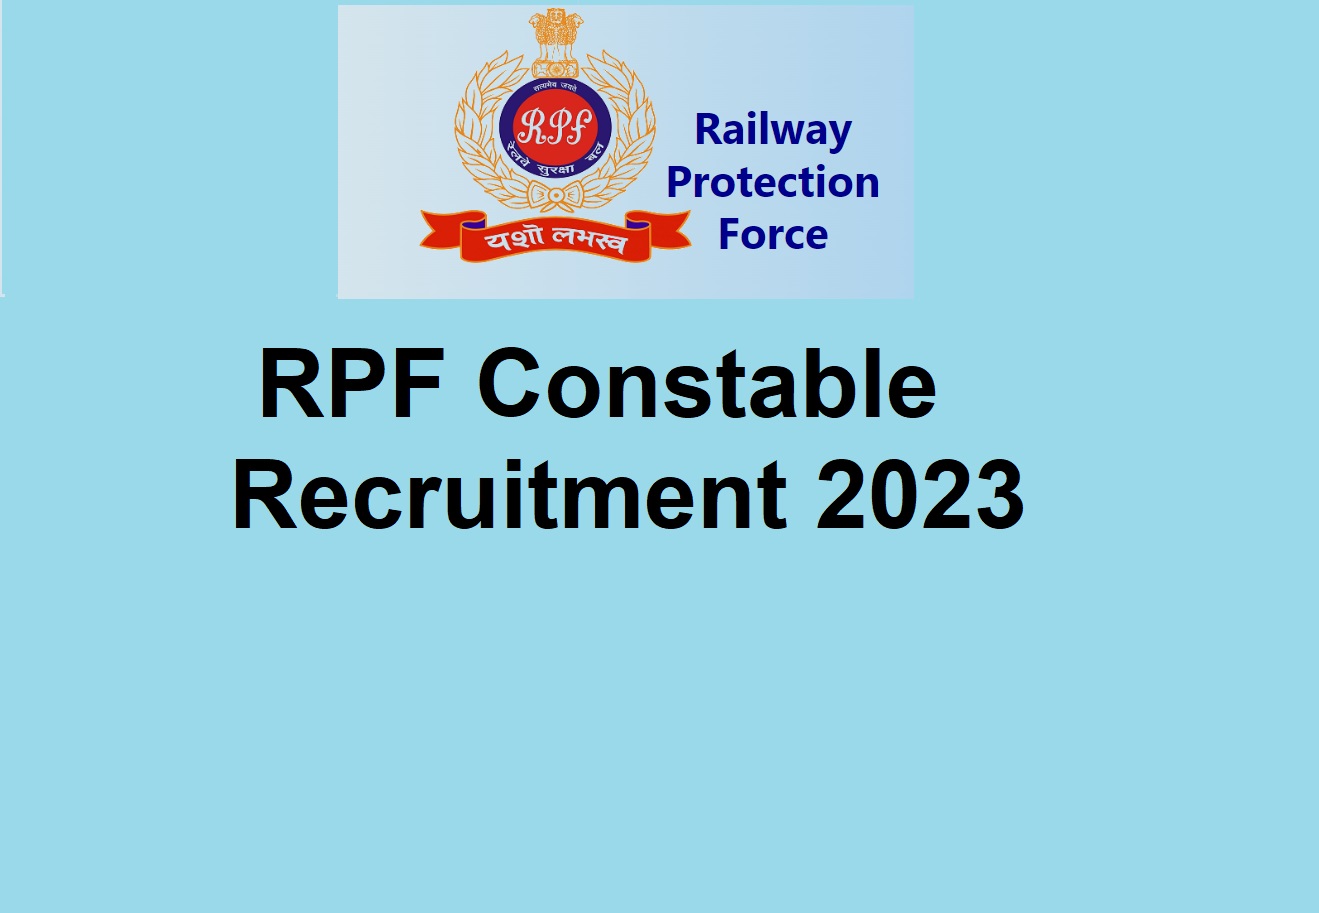 RRB RPF Constable Exams 2023: Overview, Eligibility, Exam Pattern, Syllabus and Tips